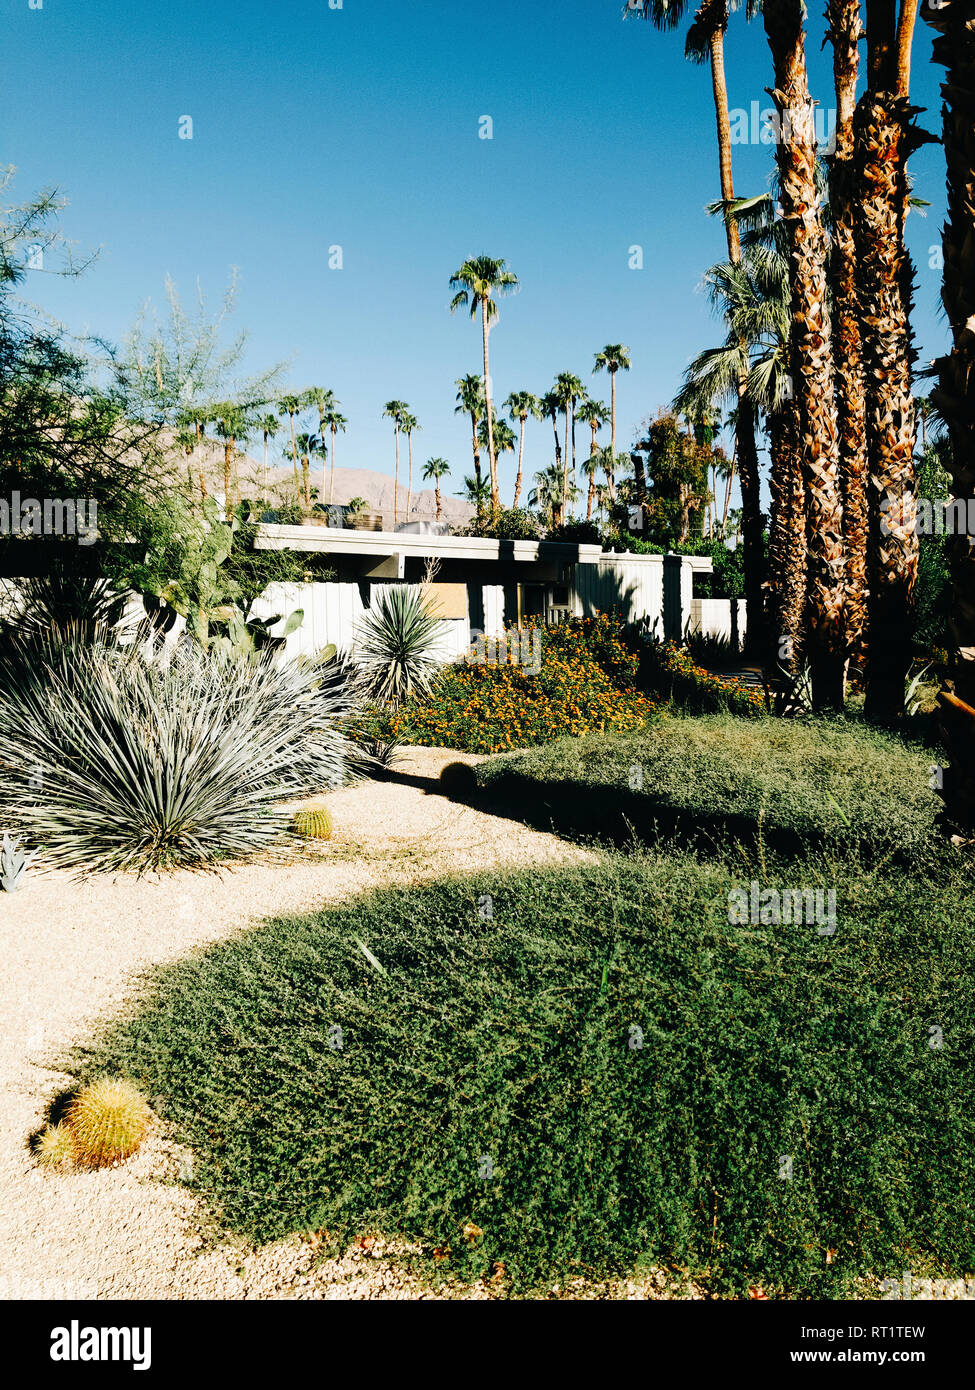 USA, Palm Springs, Garden in Front of Midcentury Modern Architecture Stock Photo